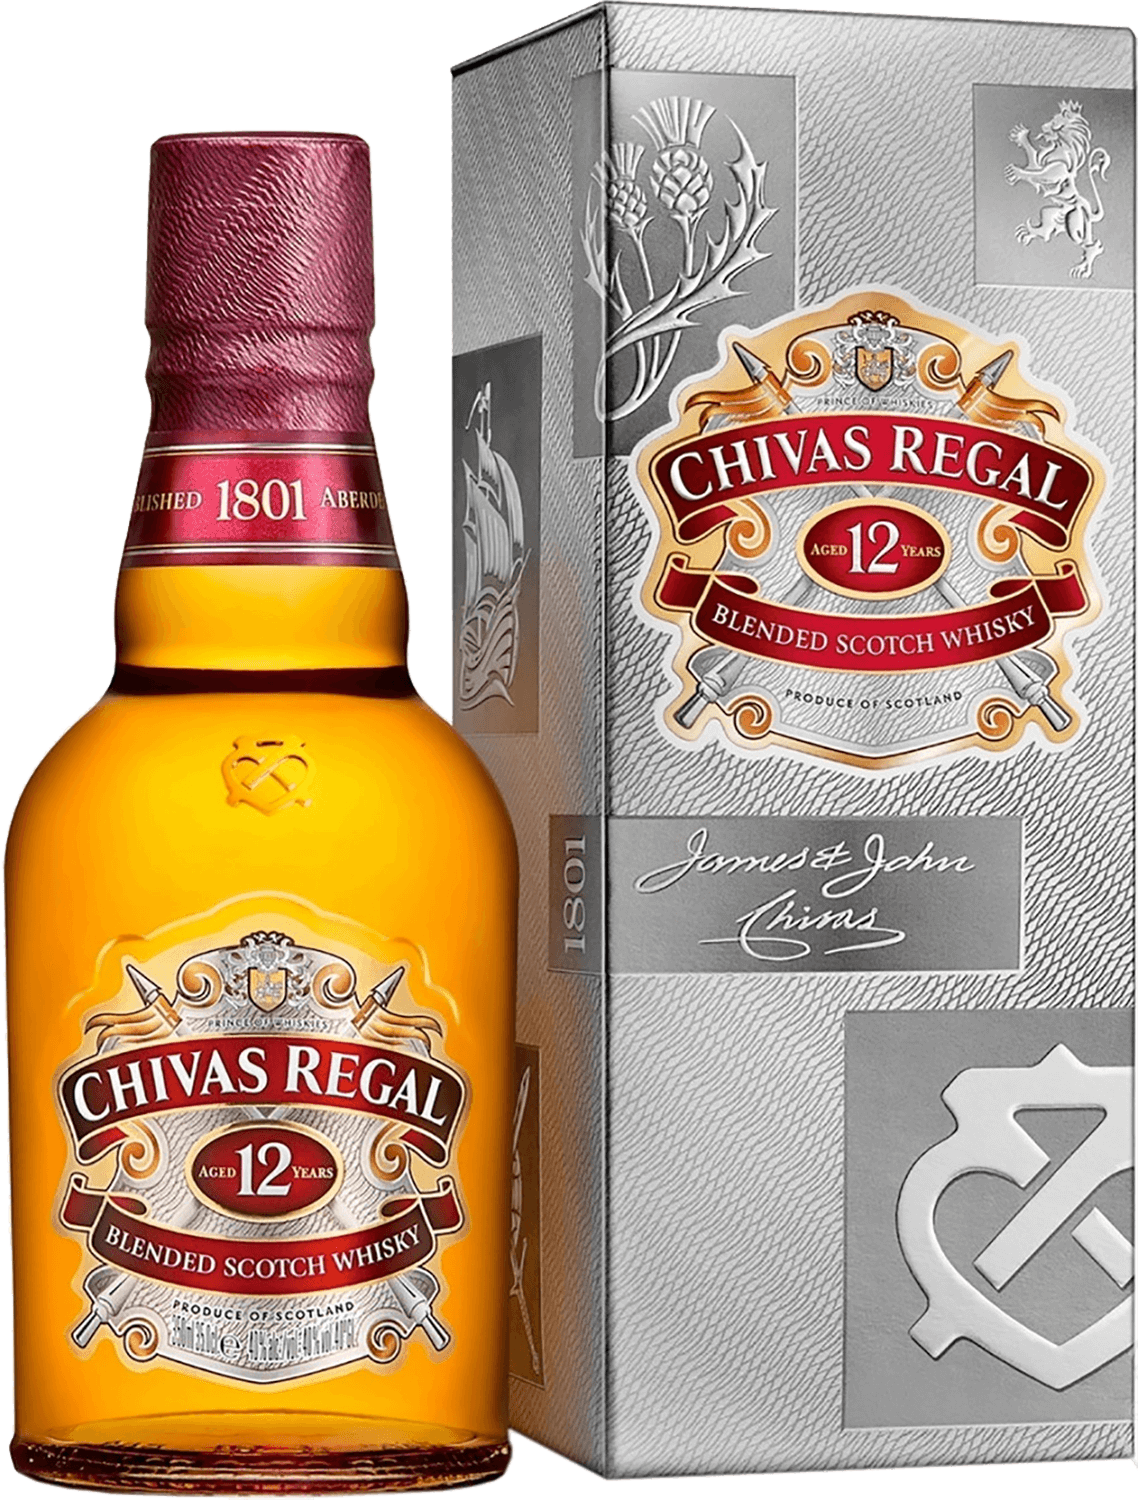 Chivas Regal Blended Scotch Whisky 12 y.o. (gift box) chivas regal extra blended scotch whisky gift box